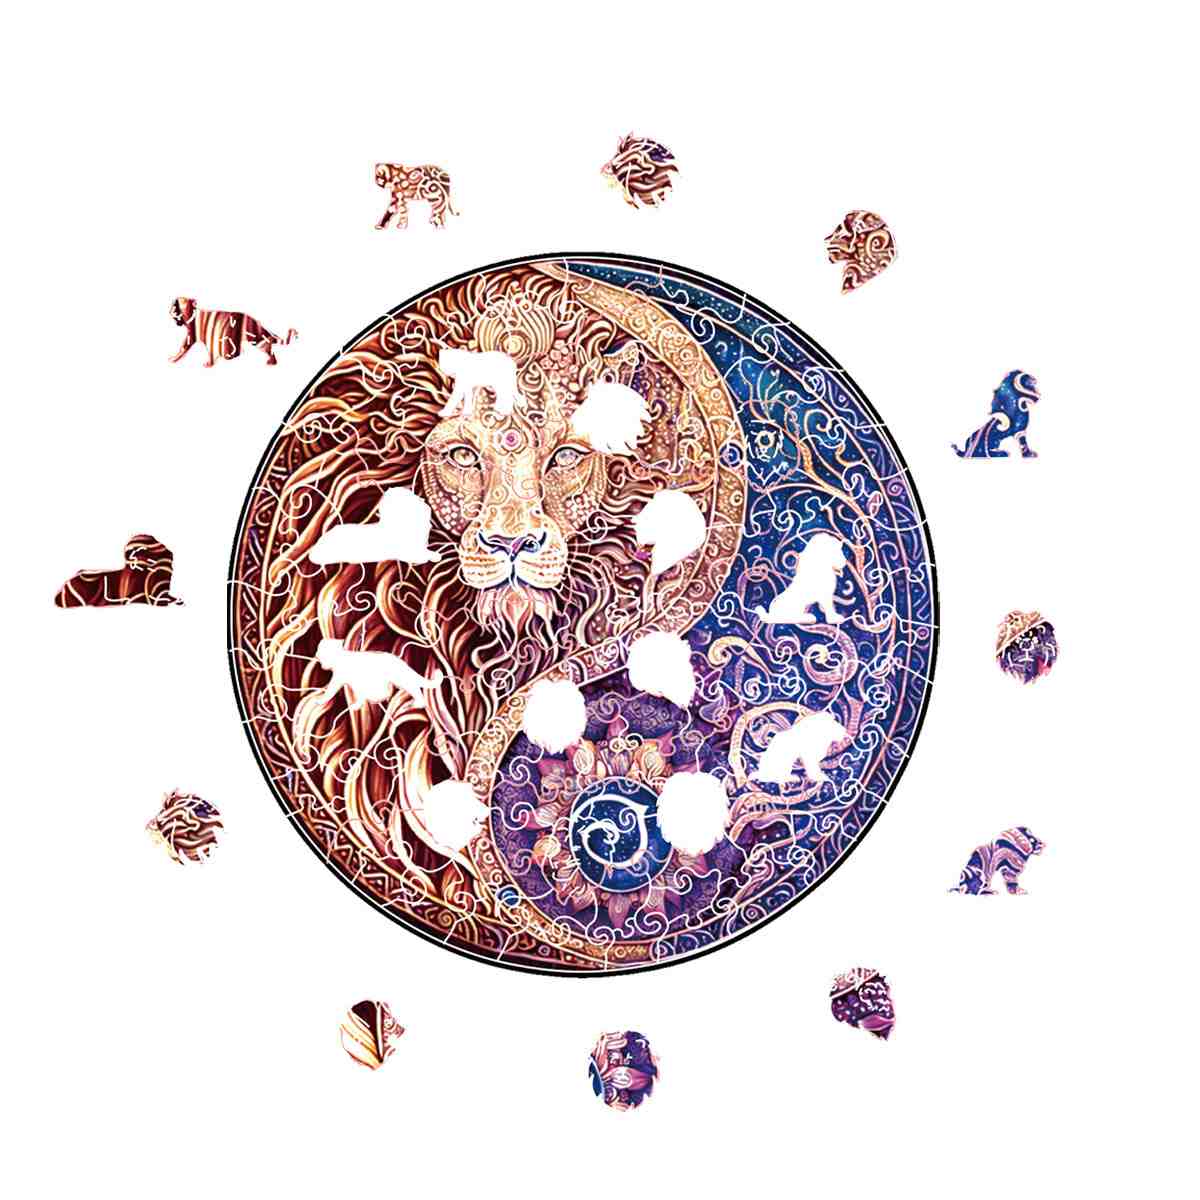 Animal Jigsaw Puzzle > Wooden Jigsaw Puzzle > Jigsaw Puzzle Lion Yin Yang - Jigsaw Puzzle